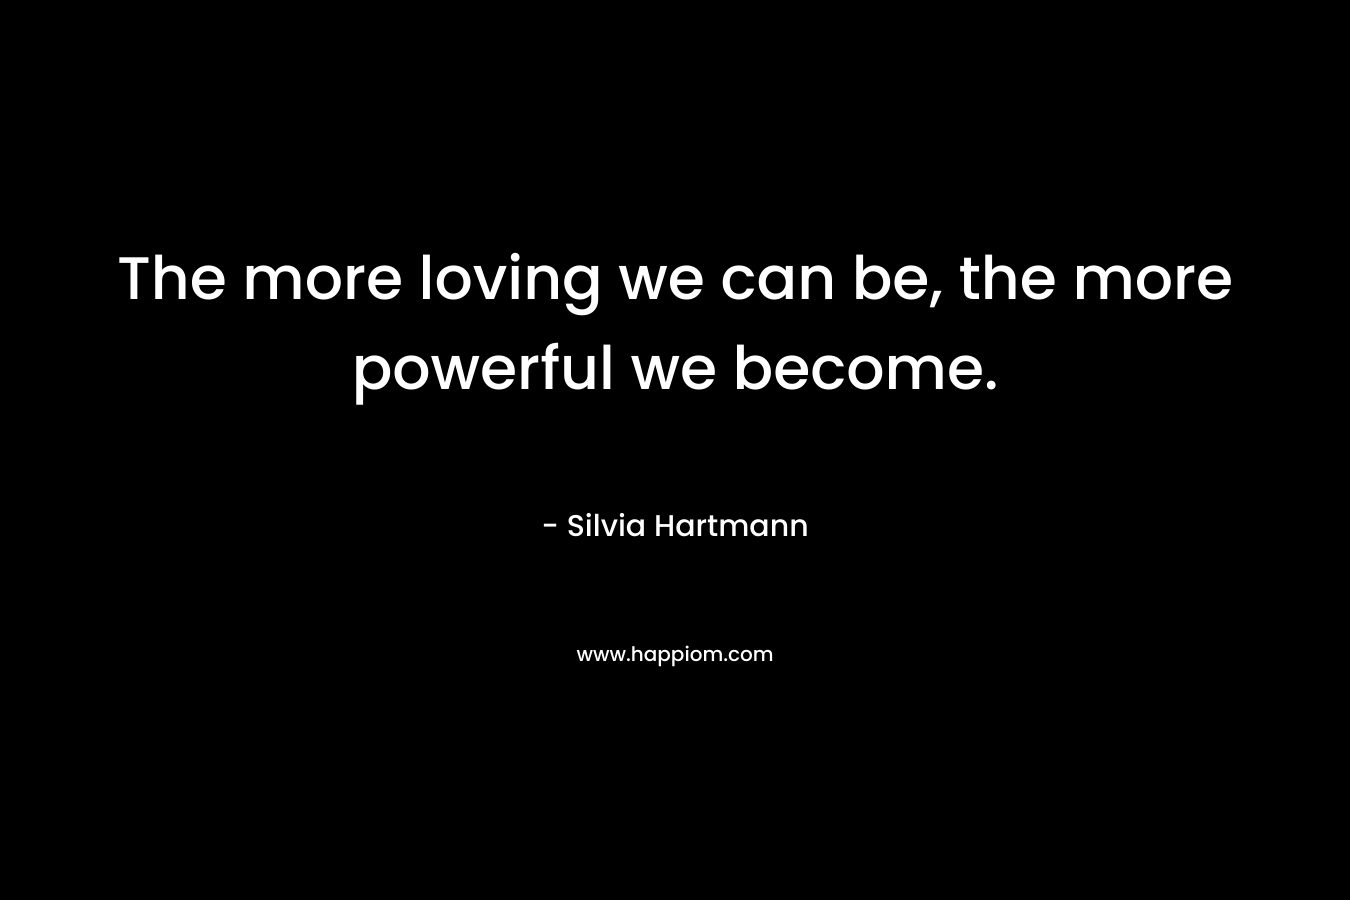 The more loving we can be, the more powerful we become.